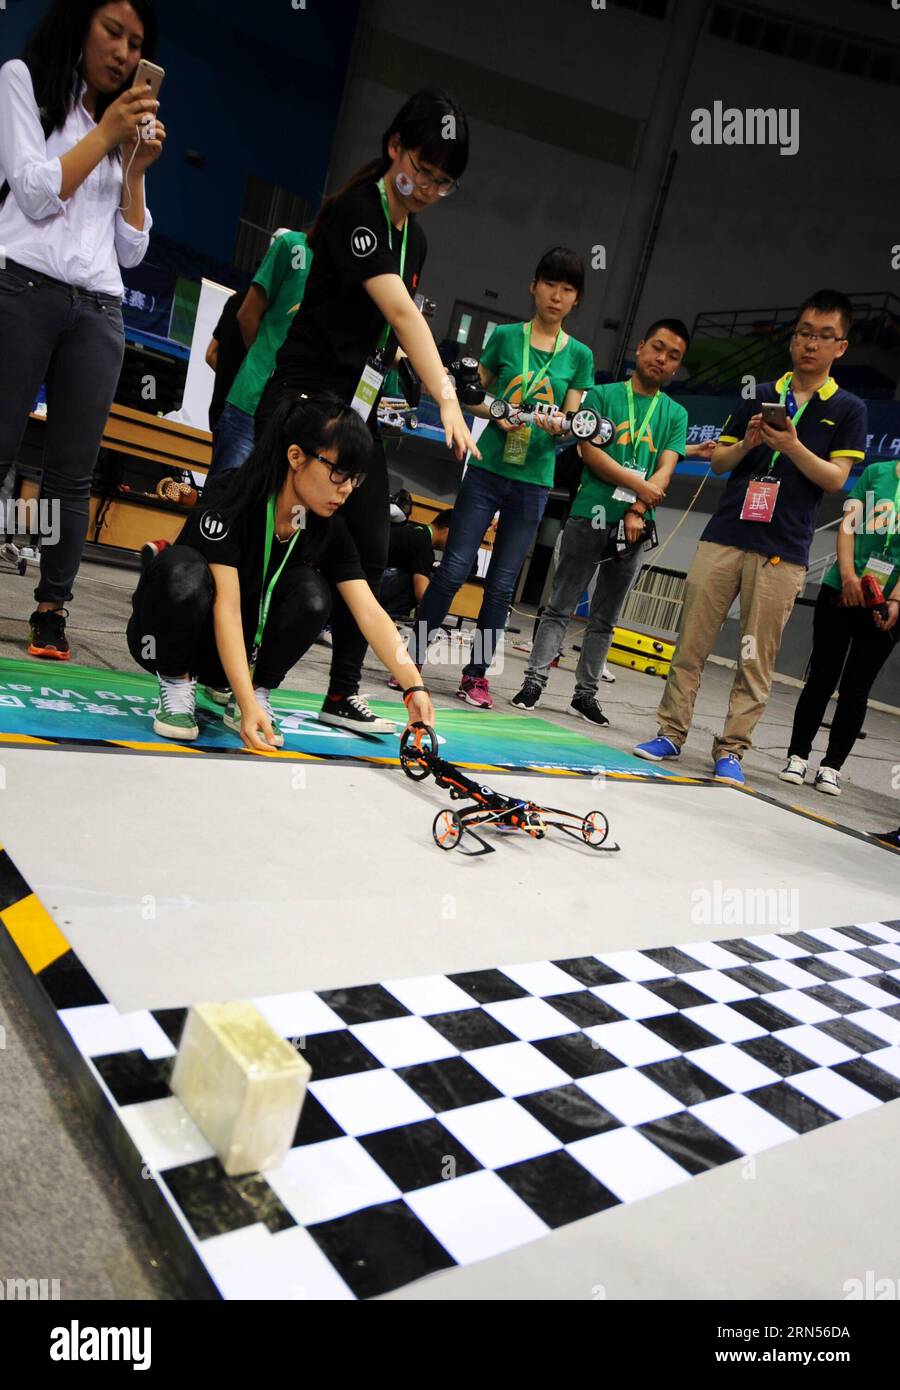 (150615) -- BEIJING, June 15, 2015 -- Competitors put their elastic model car at the start during the competition in Beijing, capital of China, June 15, 2015. The 2015 Formula-E China Design Championship was held at Beijing University of Technology on Monday. Thirty-five teams from fourteen universities in China competed for the opportunity to attend the global final held in Los Angeles in August. ) (zkr) CHINA-BEIJING-FORMULA-E DESIGN CHAMPIONSHIP(CN) LiuxYongzhen PUBLICATIONxNOTxINxCHN   Beijing June 15 2015 Competitors Put their Elastic Model Car AT The Start during The Competition in Beiji Stock Photo